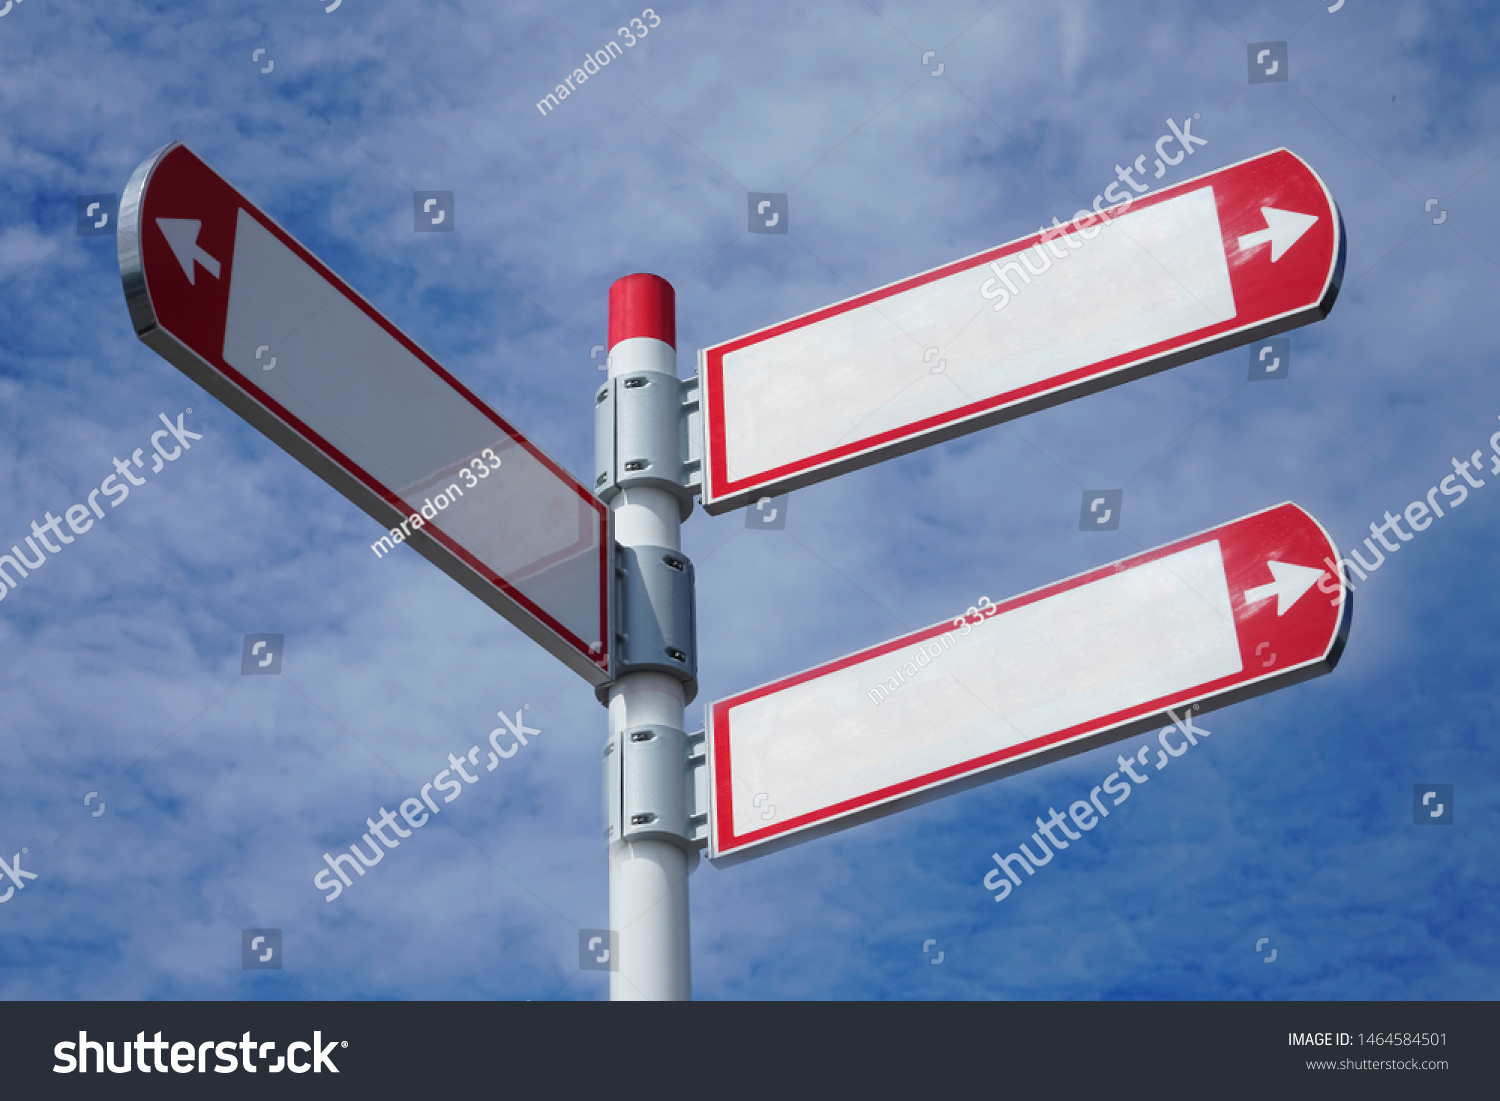 red direction sign on the pole against the blue cloudy sky. white arrow signal against heaven with clods.  empty frame blank  #1464584501